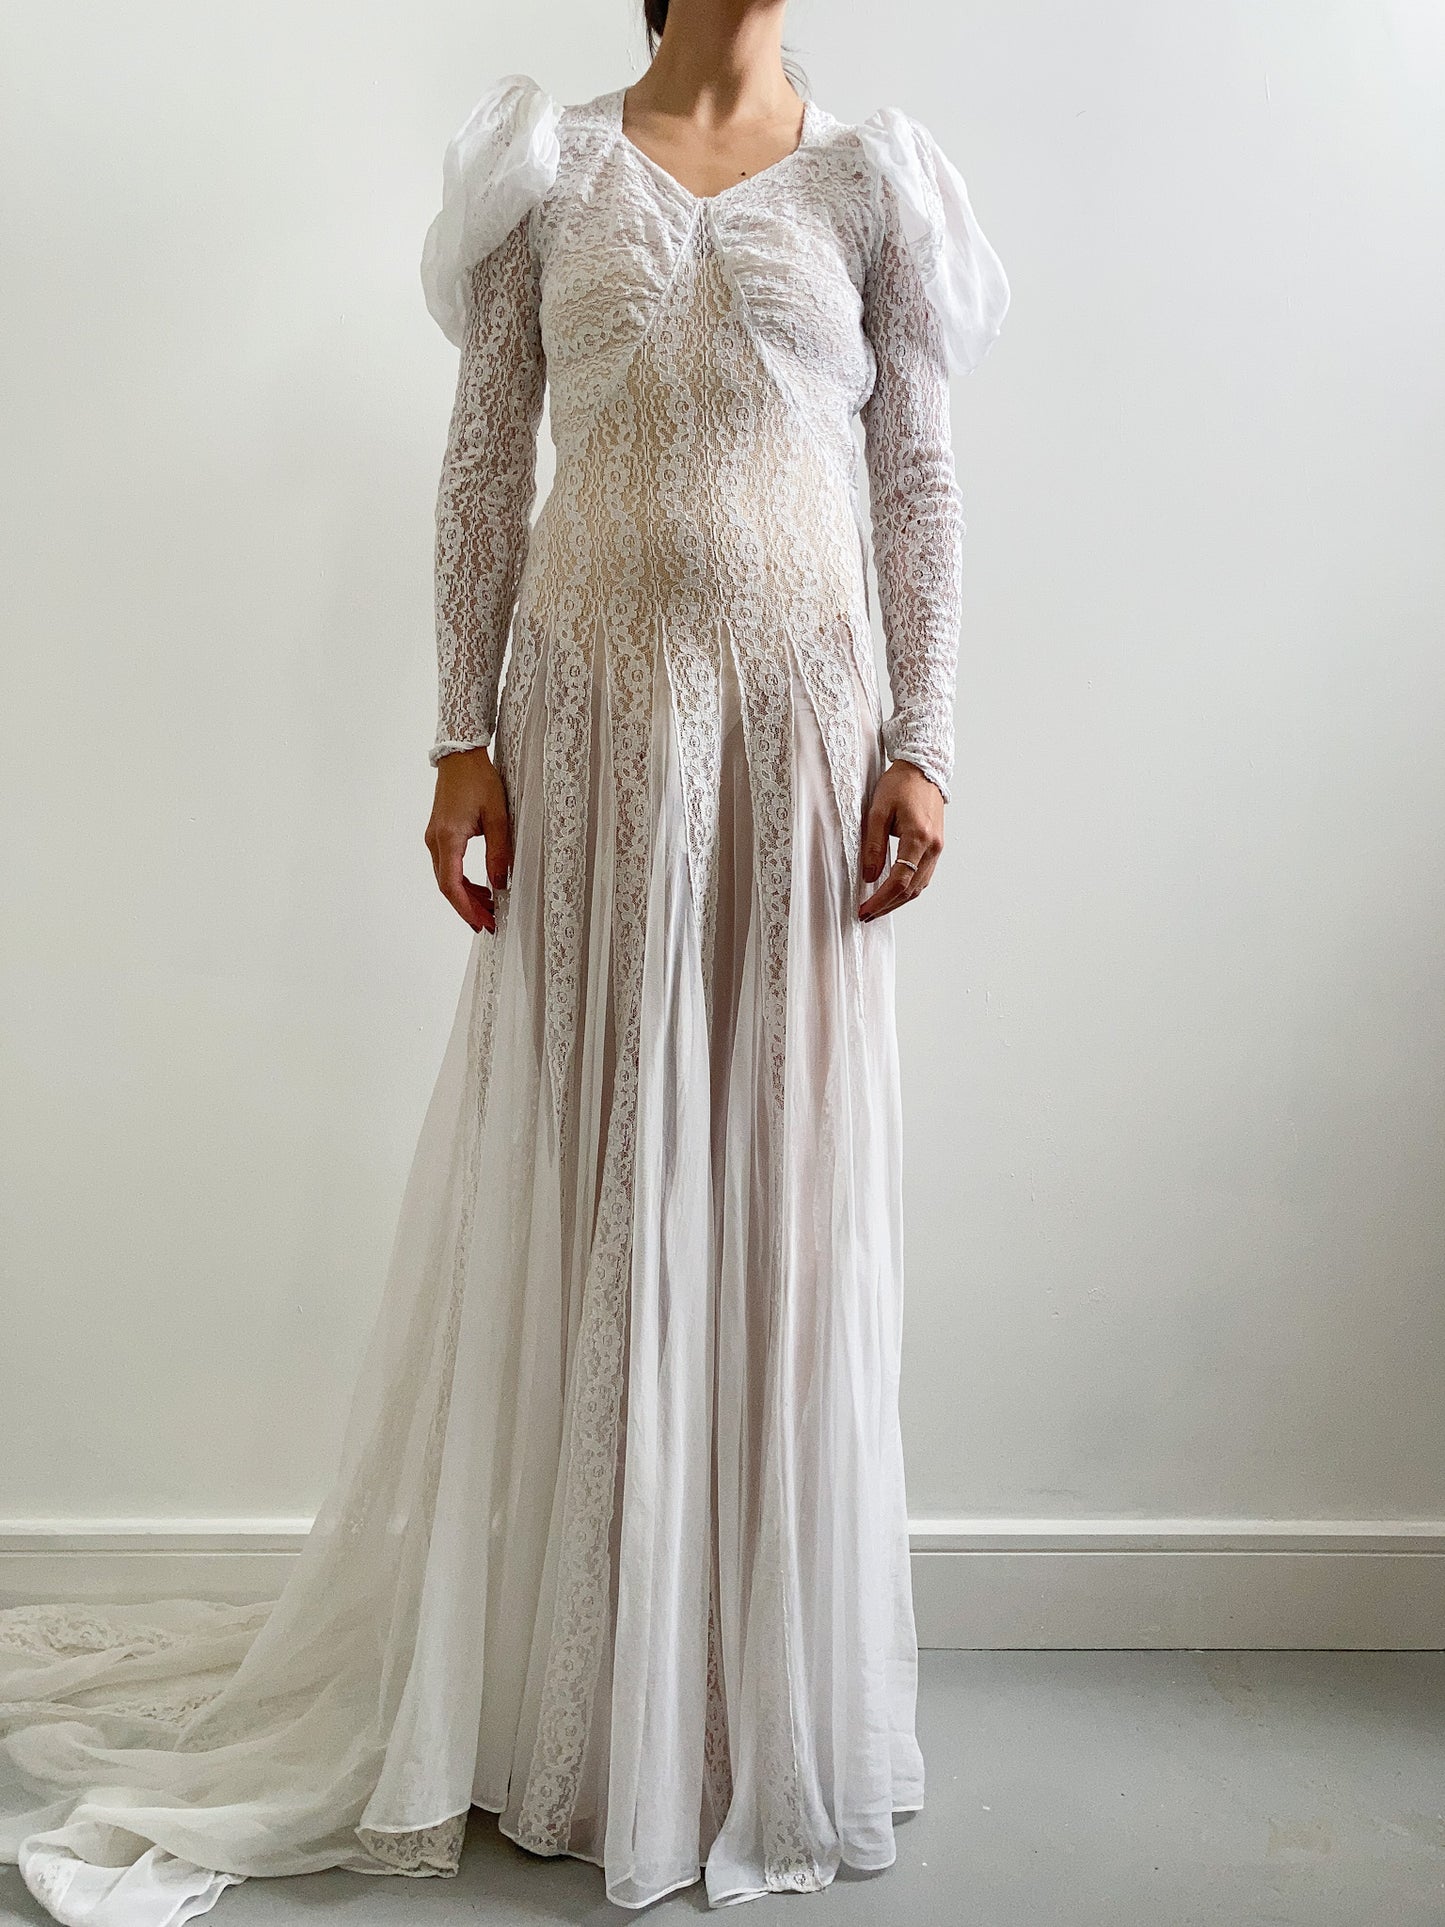 1930s Lace and Puff Sleeve Wedding Dress with Catherdal Train